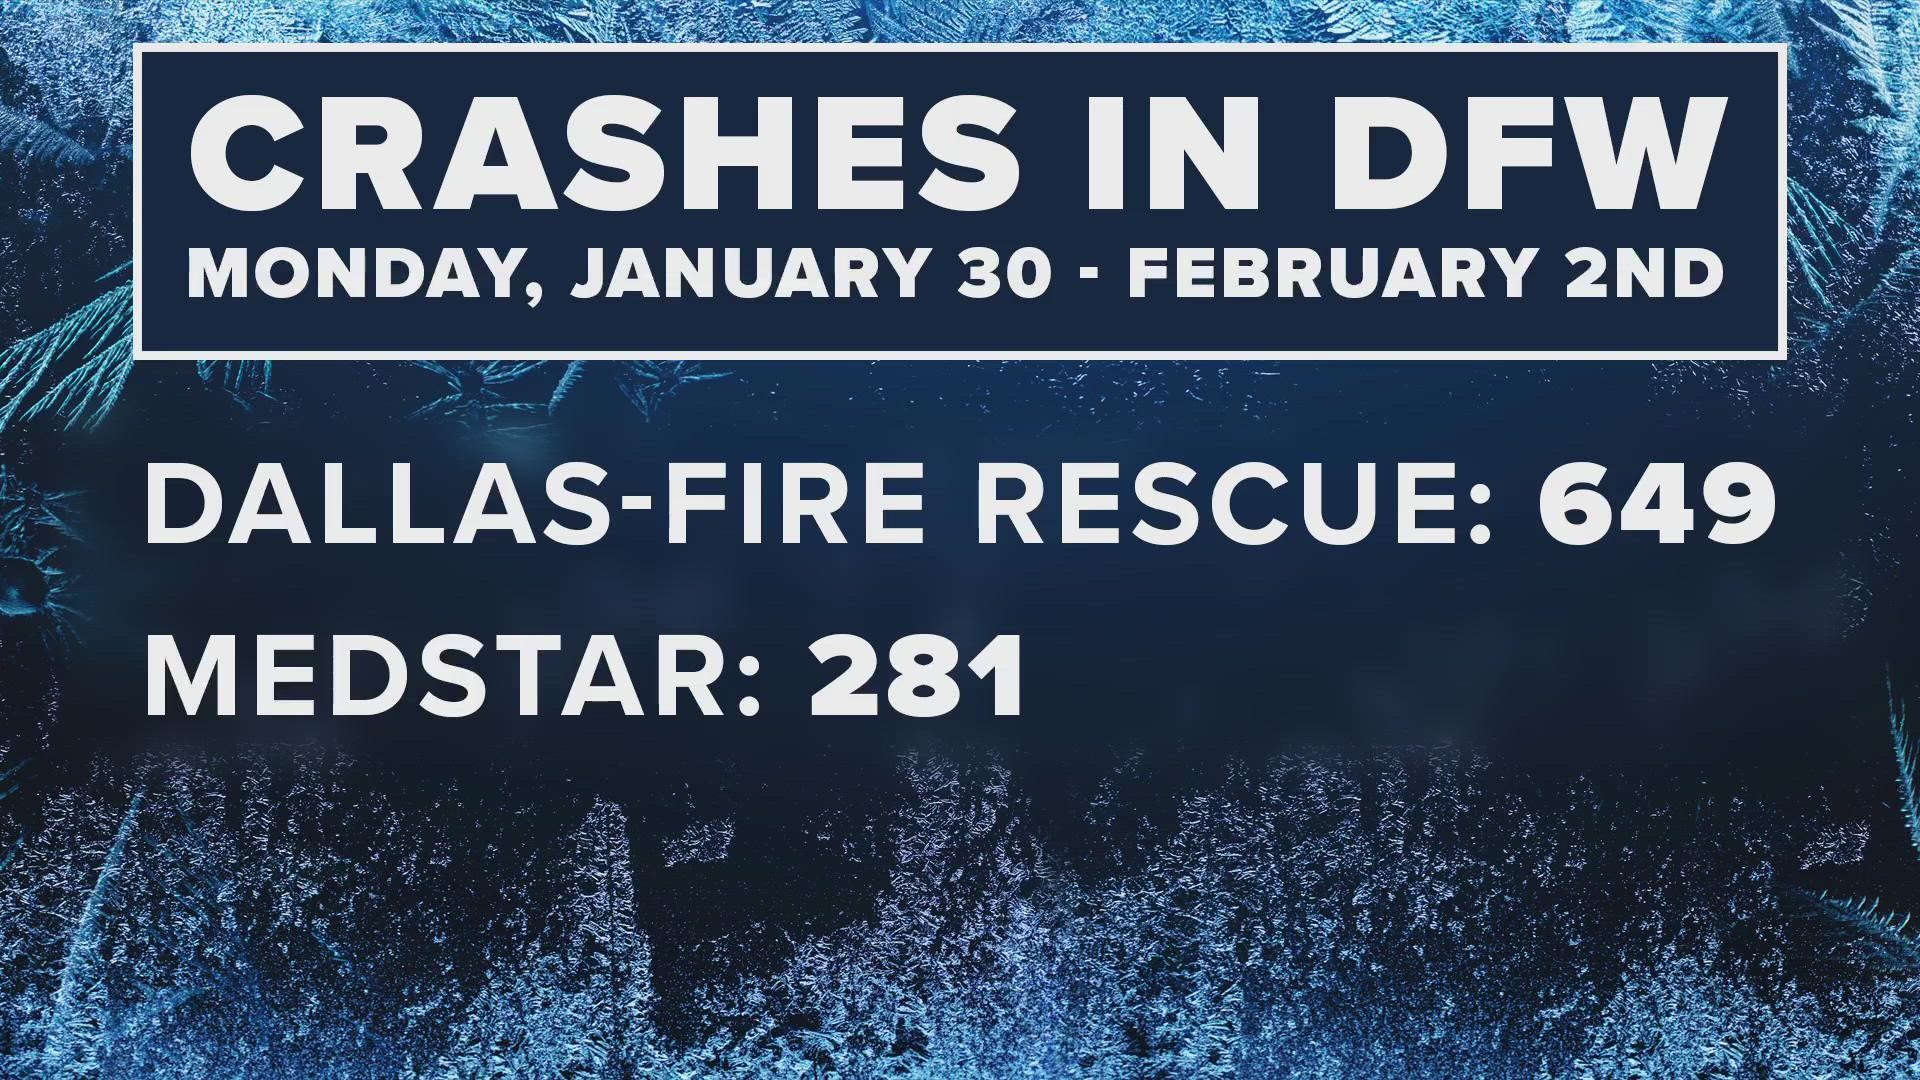 In total, 930 crashes were reported between Dallas and Fort Worth, Texas during the severe winter weather.